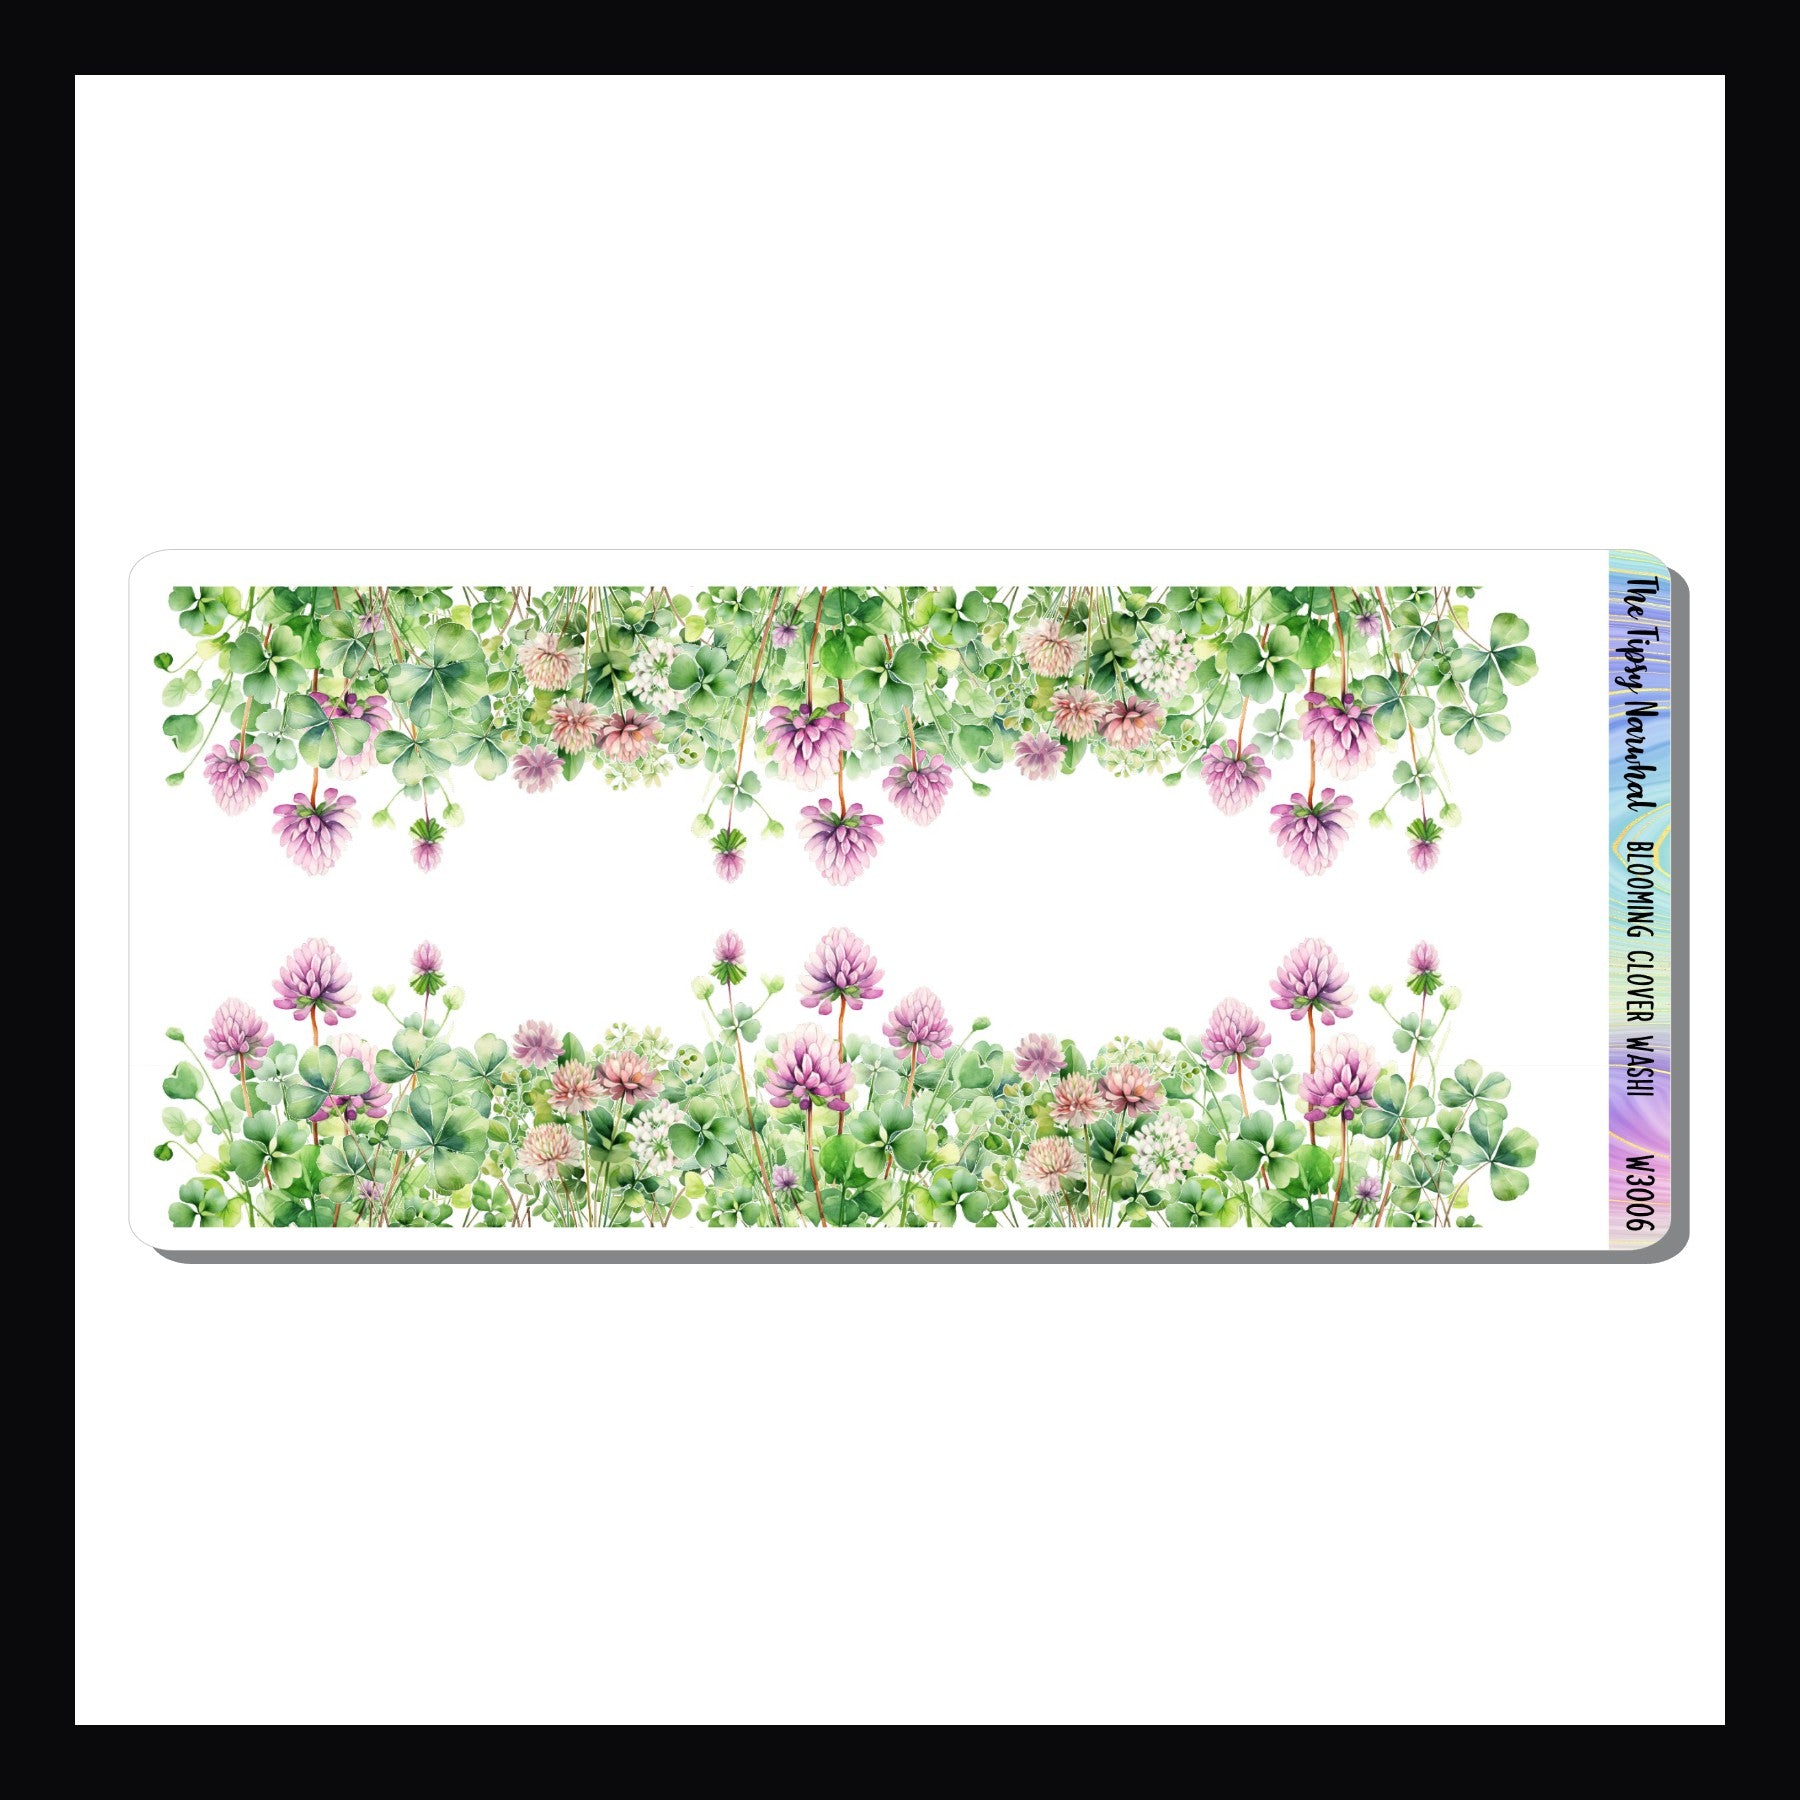 The Blooming Clover Washi sheet features two 7" strips of clover themed washi stickers.  Field of green clovers with delicate pink and purple blooms scattered throughout. 